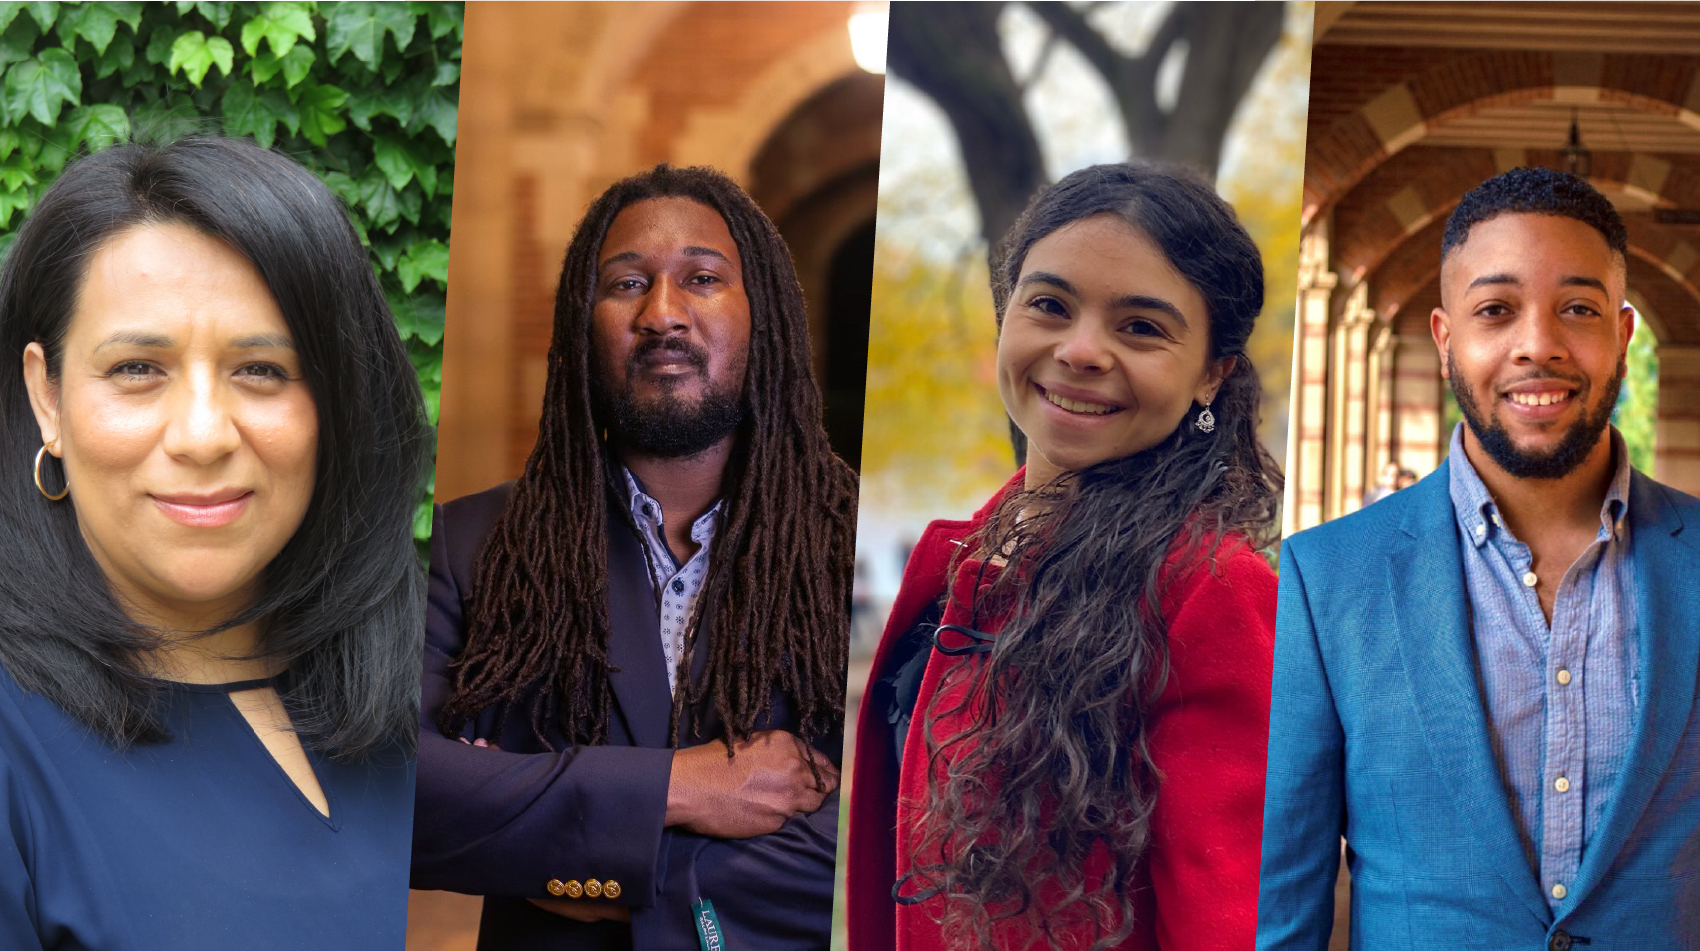 Images of, from left to right, UCLA College transfer students Carina Salazar, Chris Adams, Daniella Efrat and Darnel Grant.